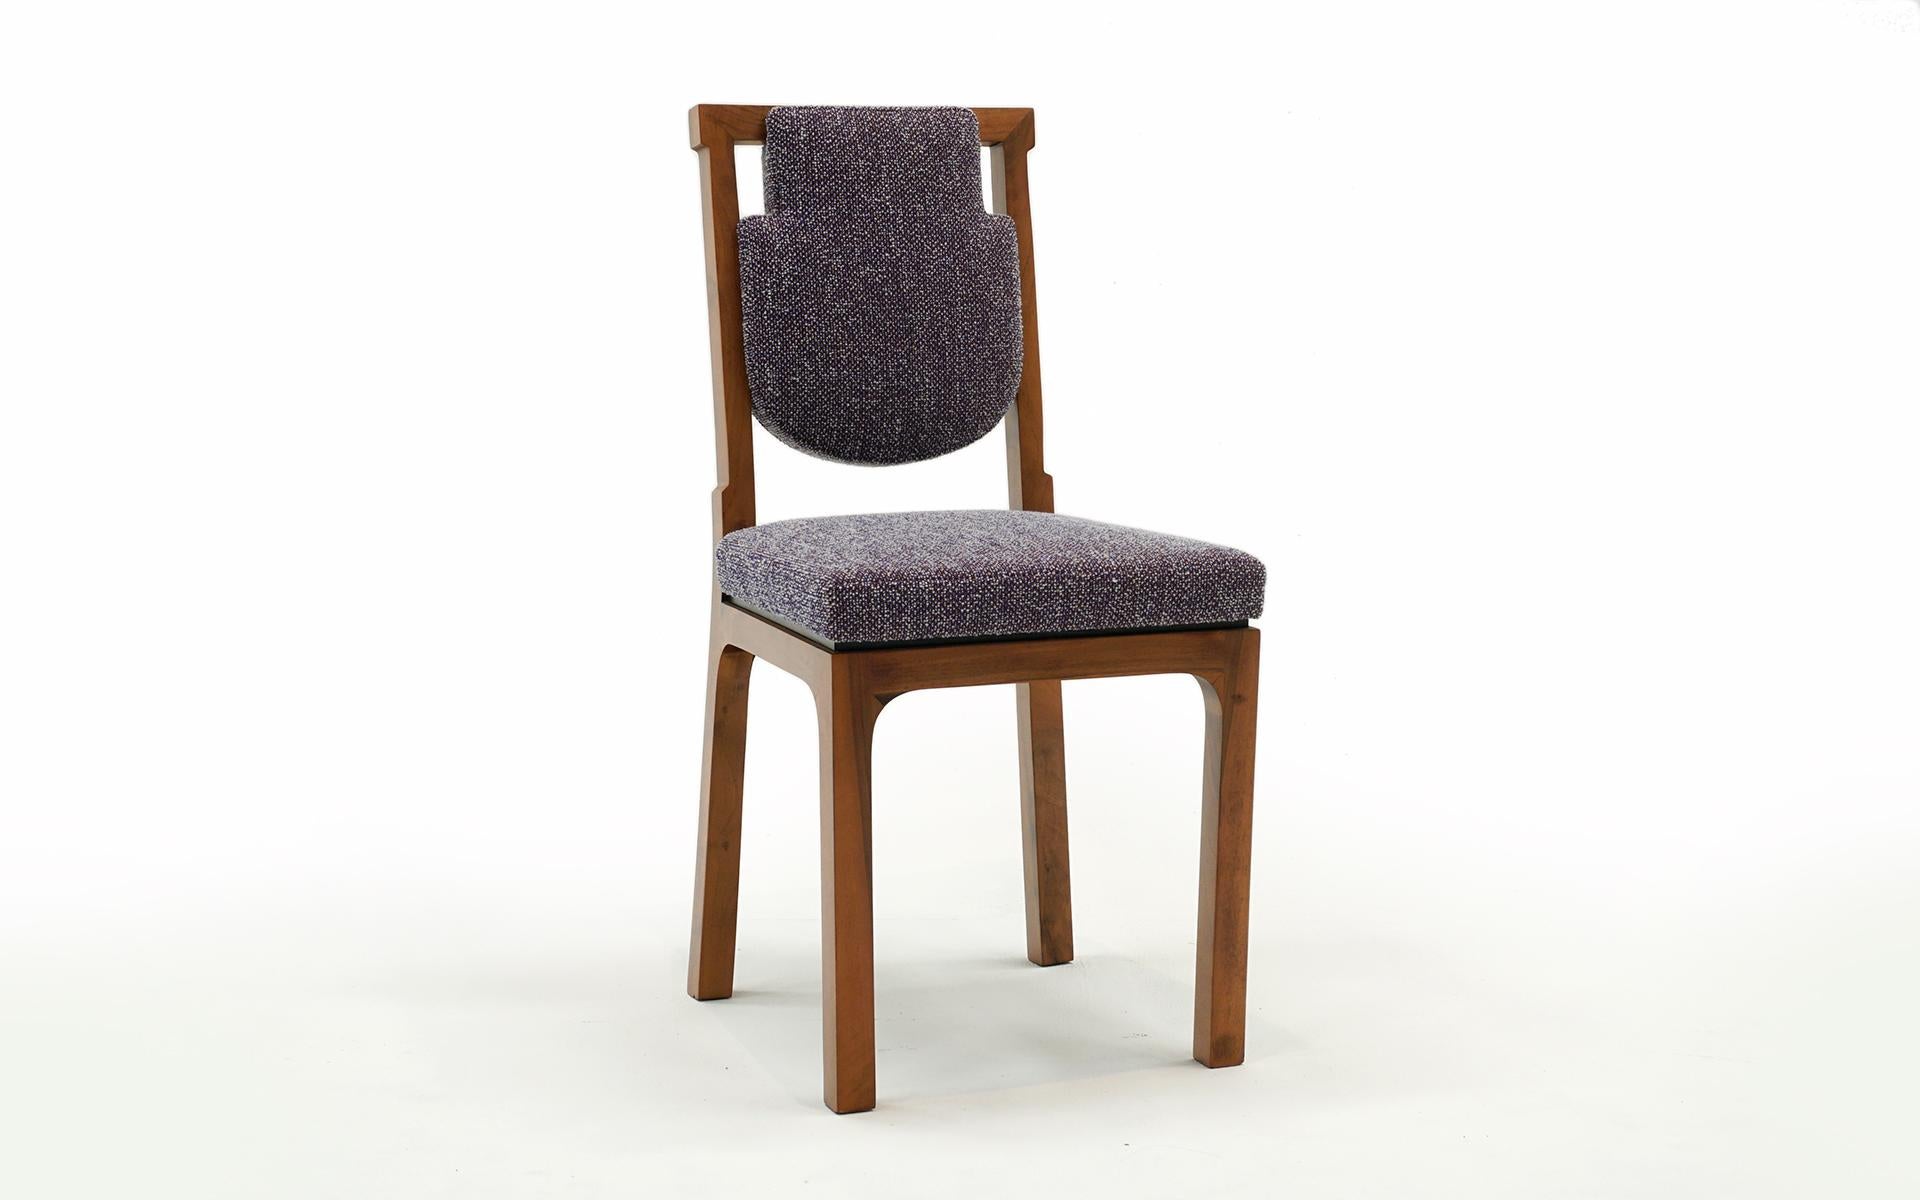 Alessandro Mendini and Mario Brunati Dining, Desk, or Side Armless Chair, Model BM5
for Moscatelli, Italy, 1965.  Lavender / light purple fabric and walnut frame.  A beautiful example in great condition.  Expertly reupholstered.  Few if any signs of